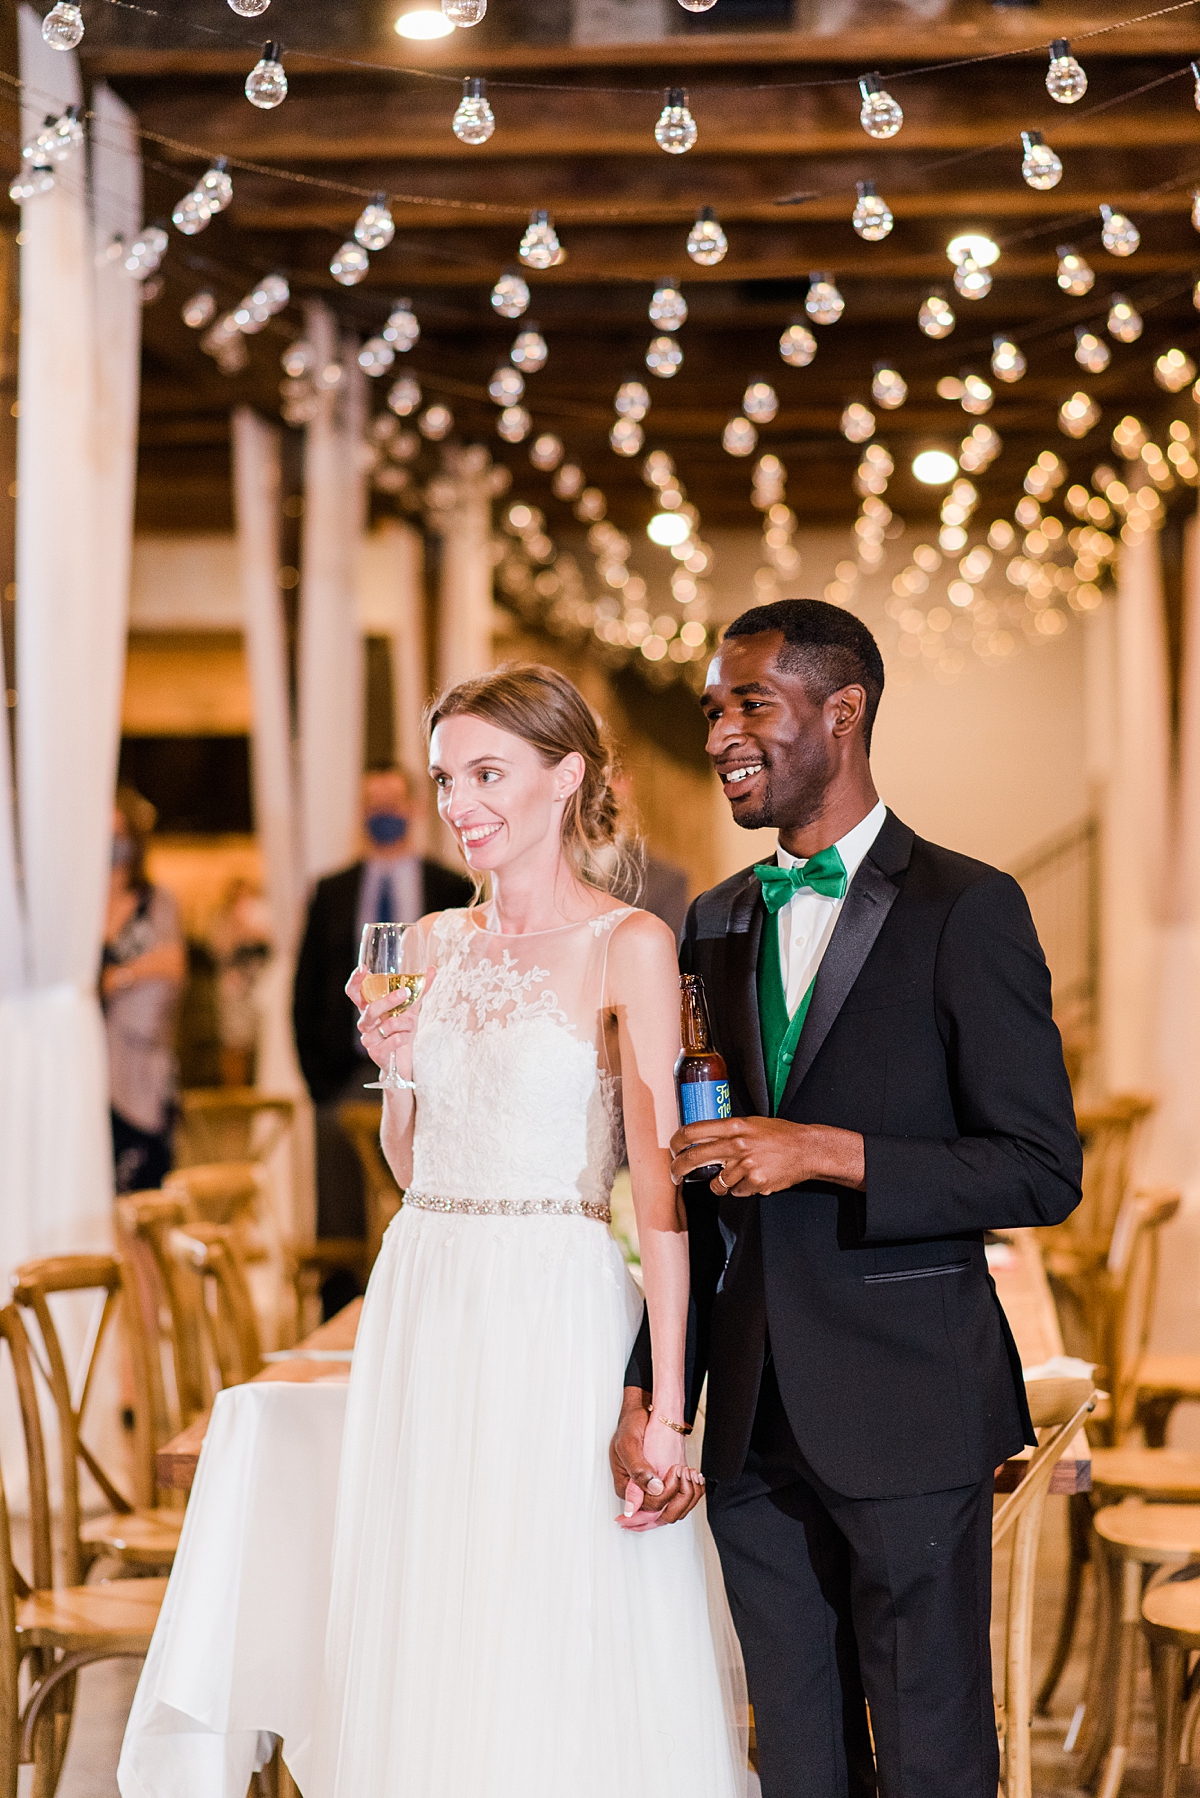 Bride and Groom During Toasts at Granary at Valley Pike Rustic Wedding Reception. Wedding Photography by Virginia Wedding Photographer Kailey Brianne Photography. 